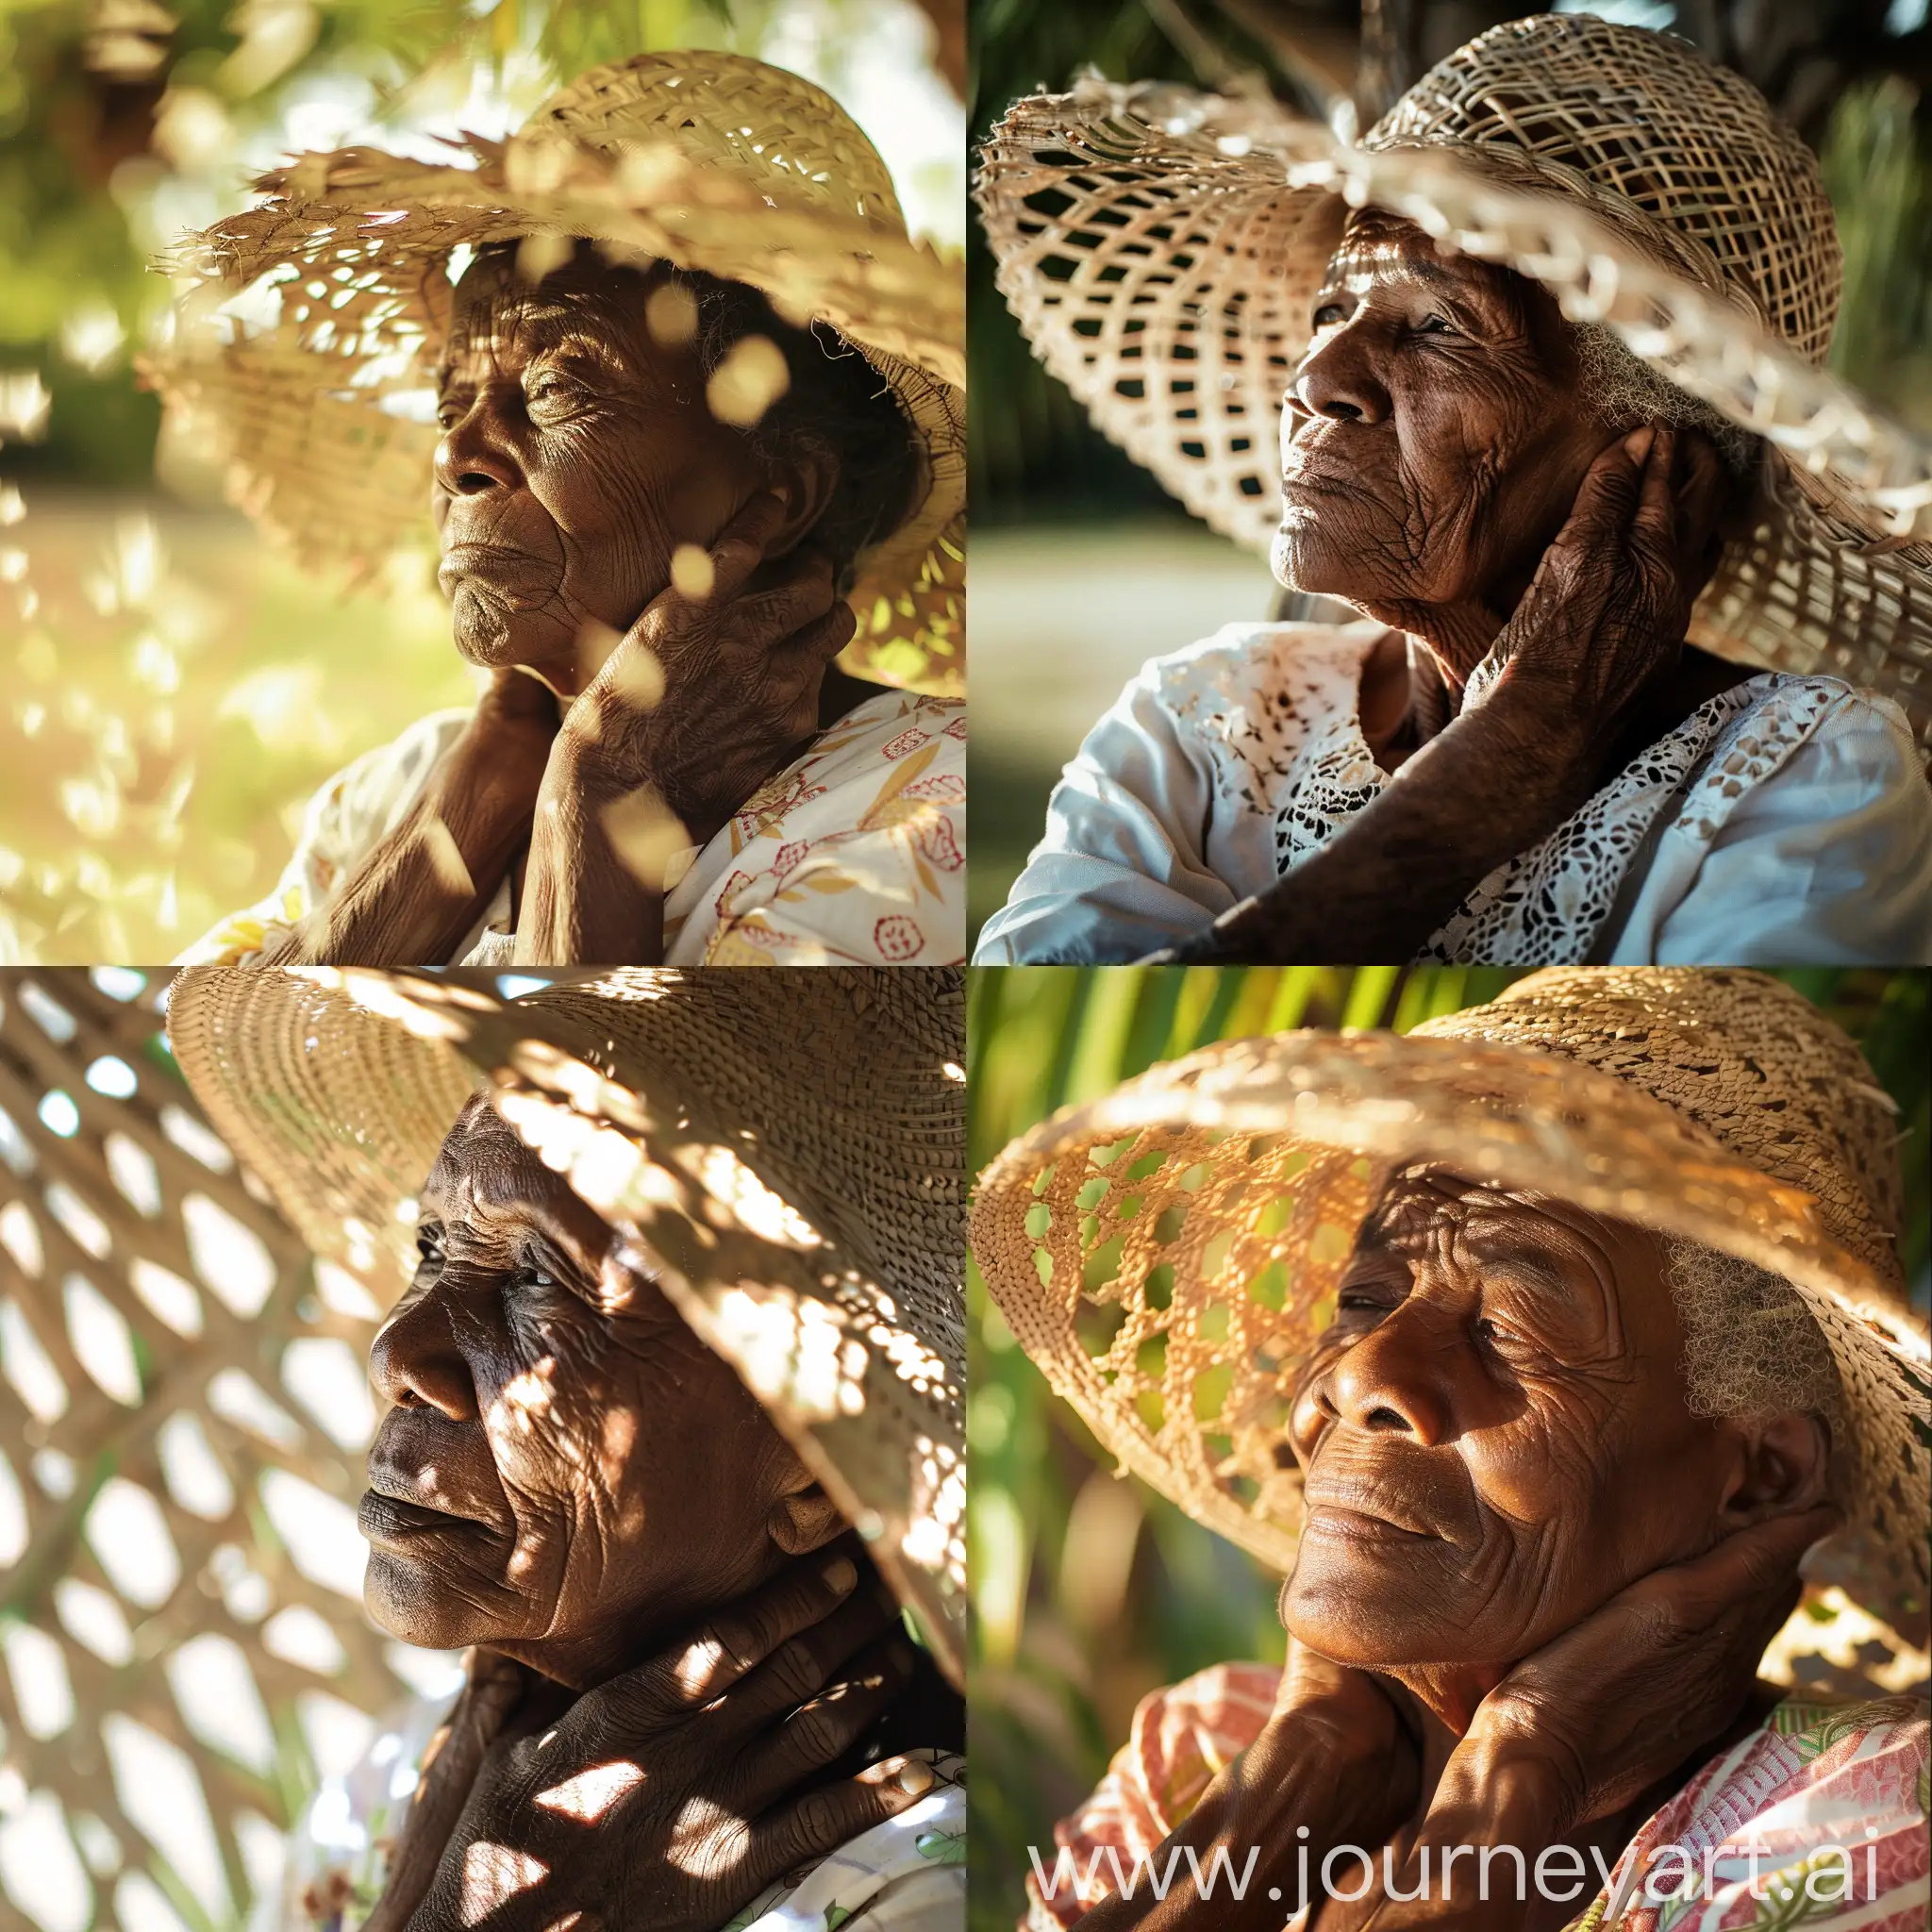 Old African woman wearing an old straw hat. She is holding her neck. It’s a bright sunny day and some of the light is slipping through the straw hat pattern.